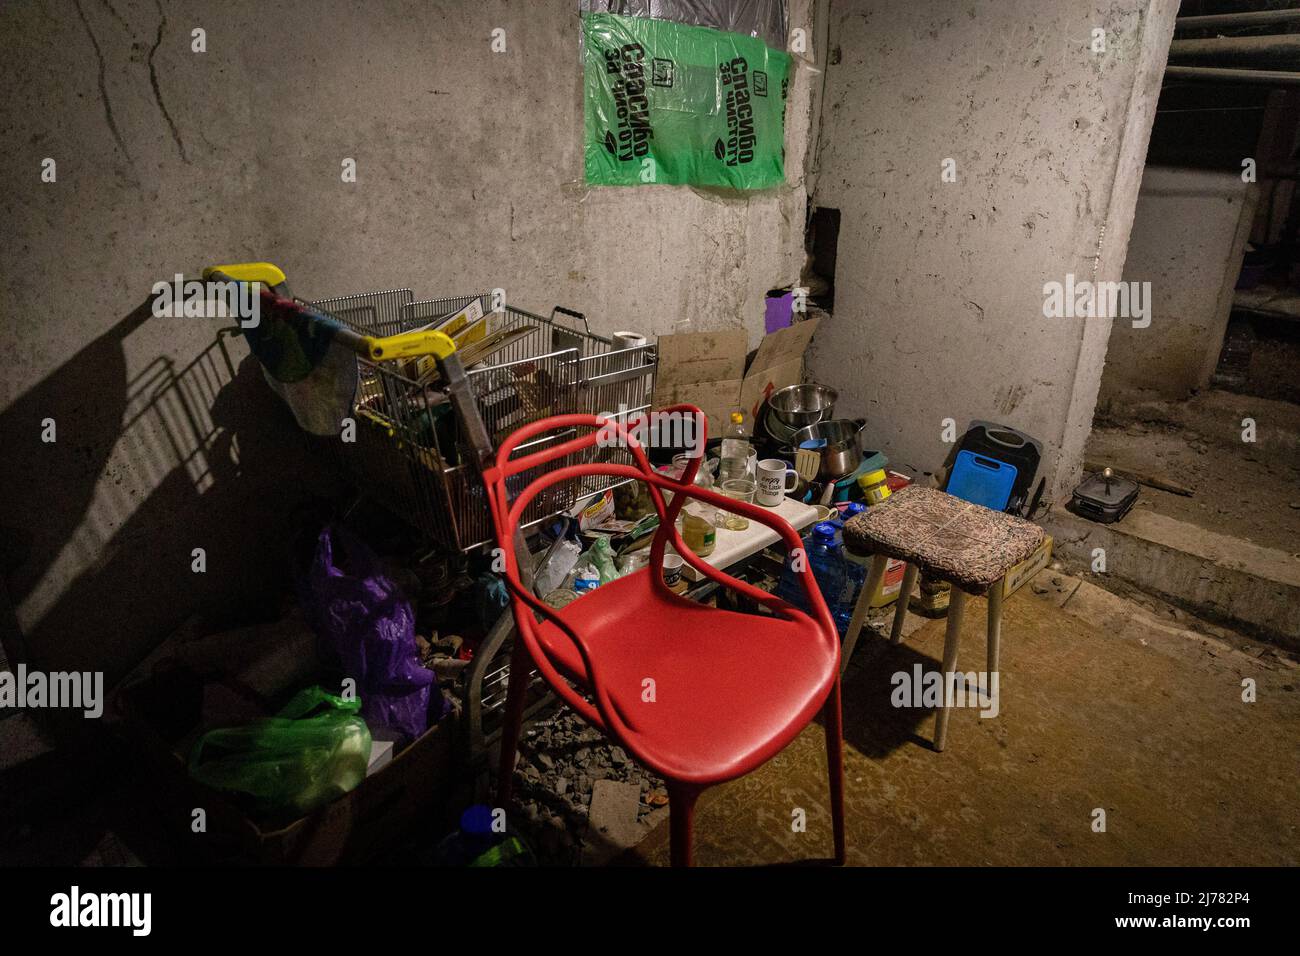 Food and daily necessities placed in a shopping cart in a underground bunker in southeastern Kharkiv. Citizens in Kharkiv have been forced to adopt a new life underground in bunkers without electricity and water, as the second biggest city in Ukraine now faces under constant threat of Russian bombardment and airstrikes. Stock Photo